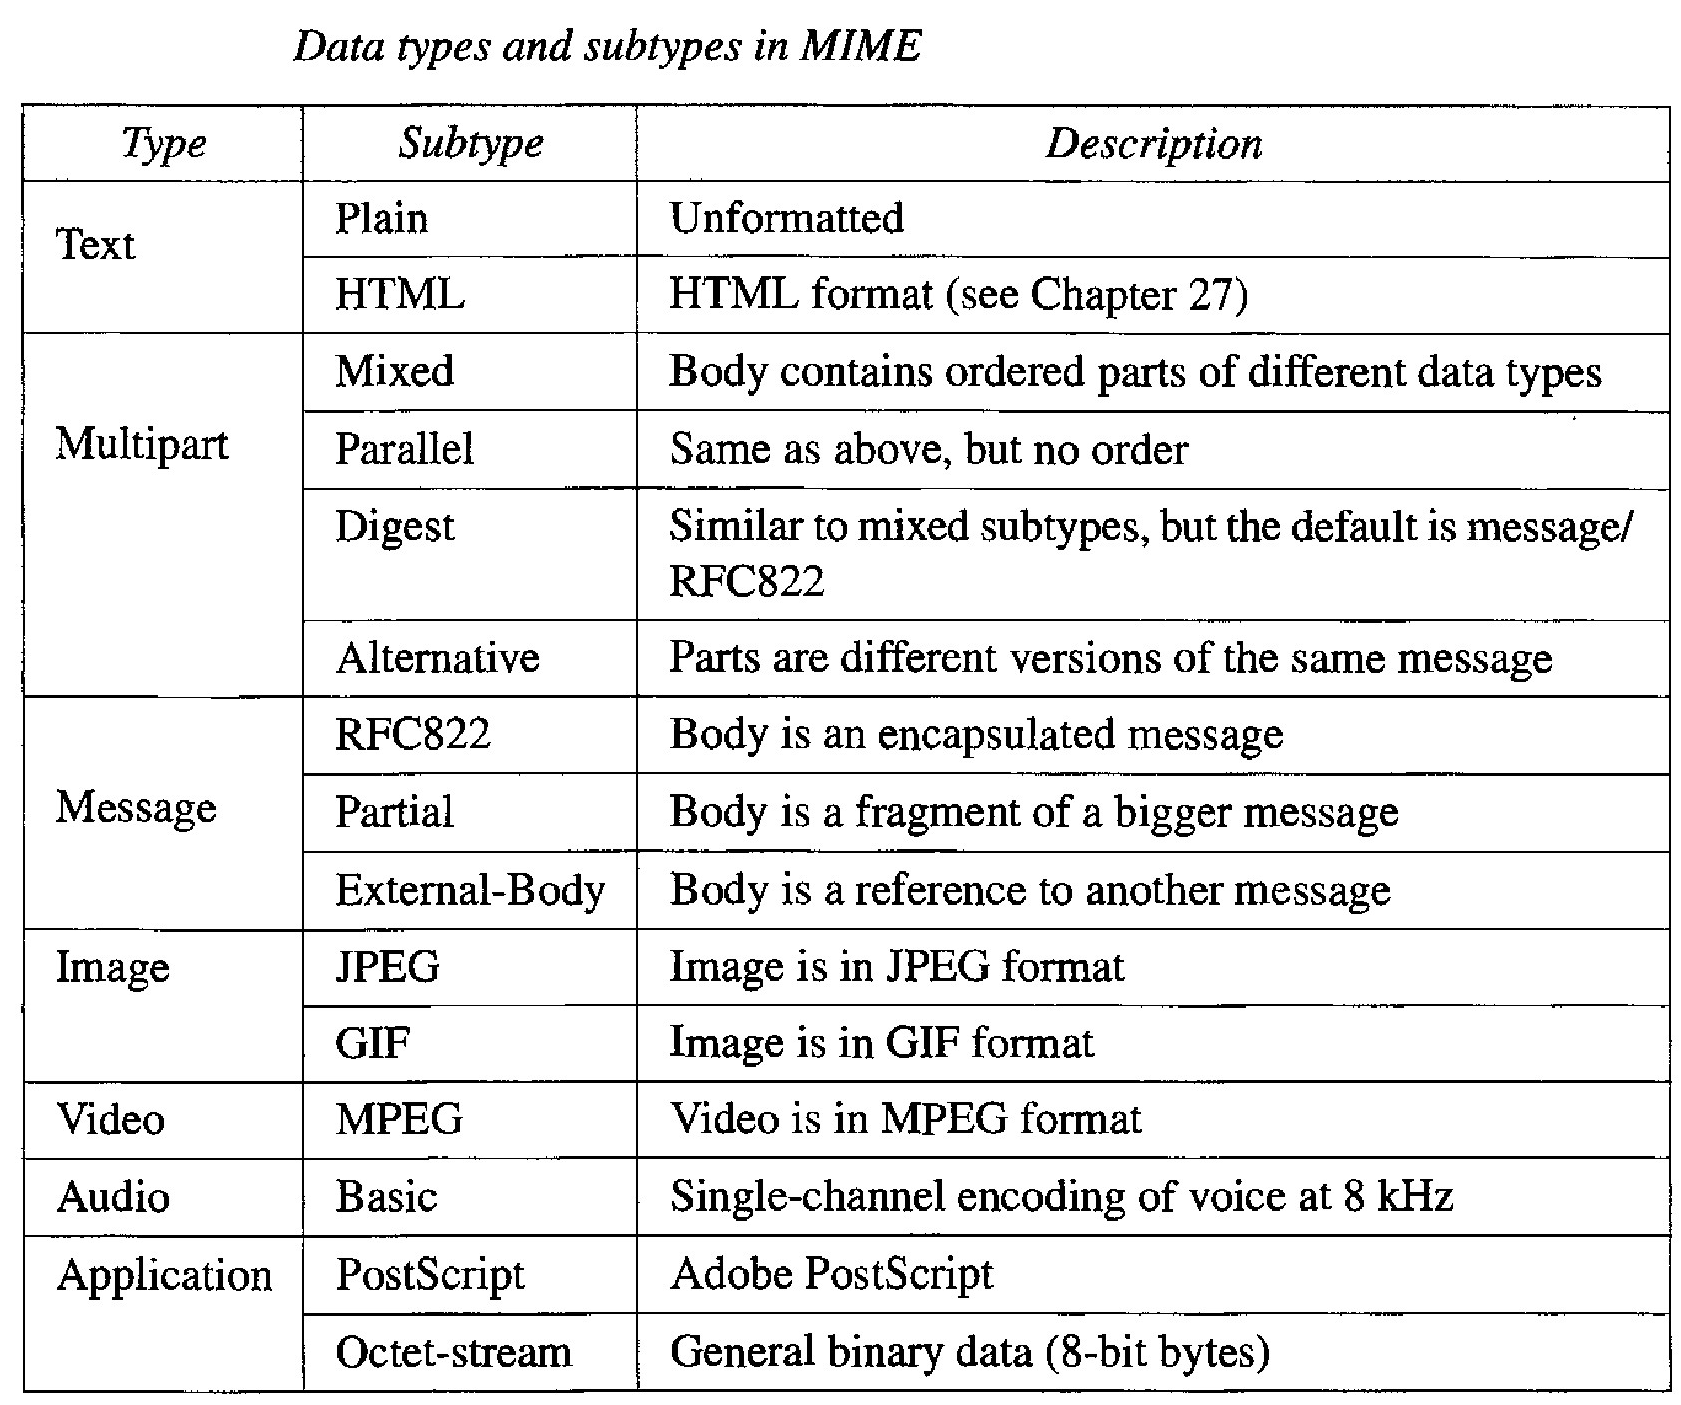 Data types and subtypes in MIME